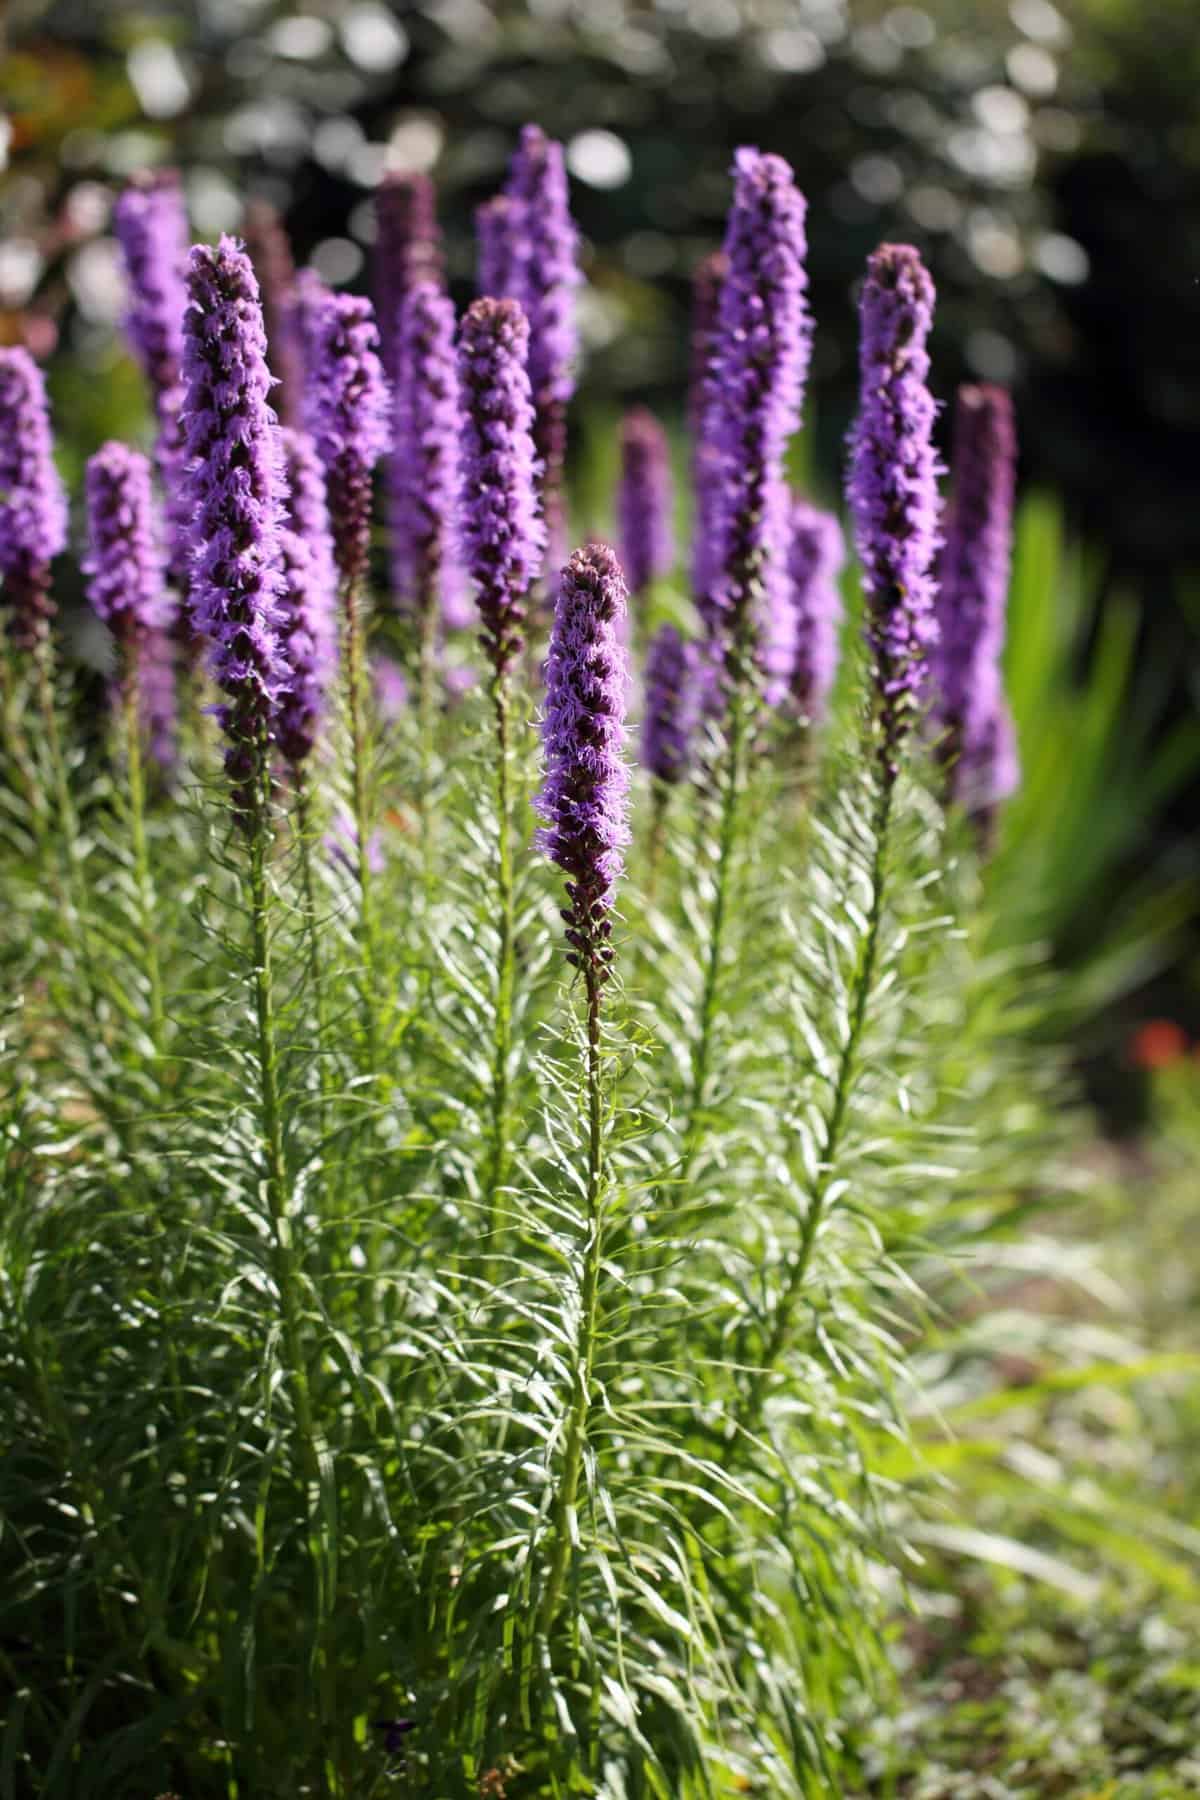 A cluster of tall, purple liatris flowers bloom in a garden, bathed in sunlight. The flowers have elongated, spiky blossoms atop green, leafy stems, creating a vibrant display. The background is slightly blurred, focusing attention on the vivid flowers in the foreground of a serene backyard yoga space.